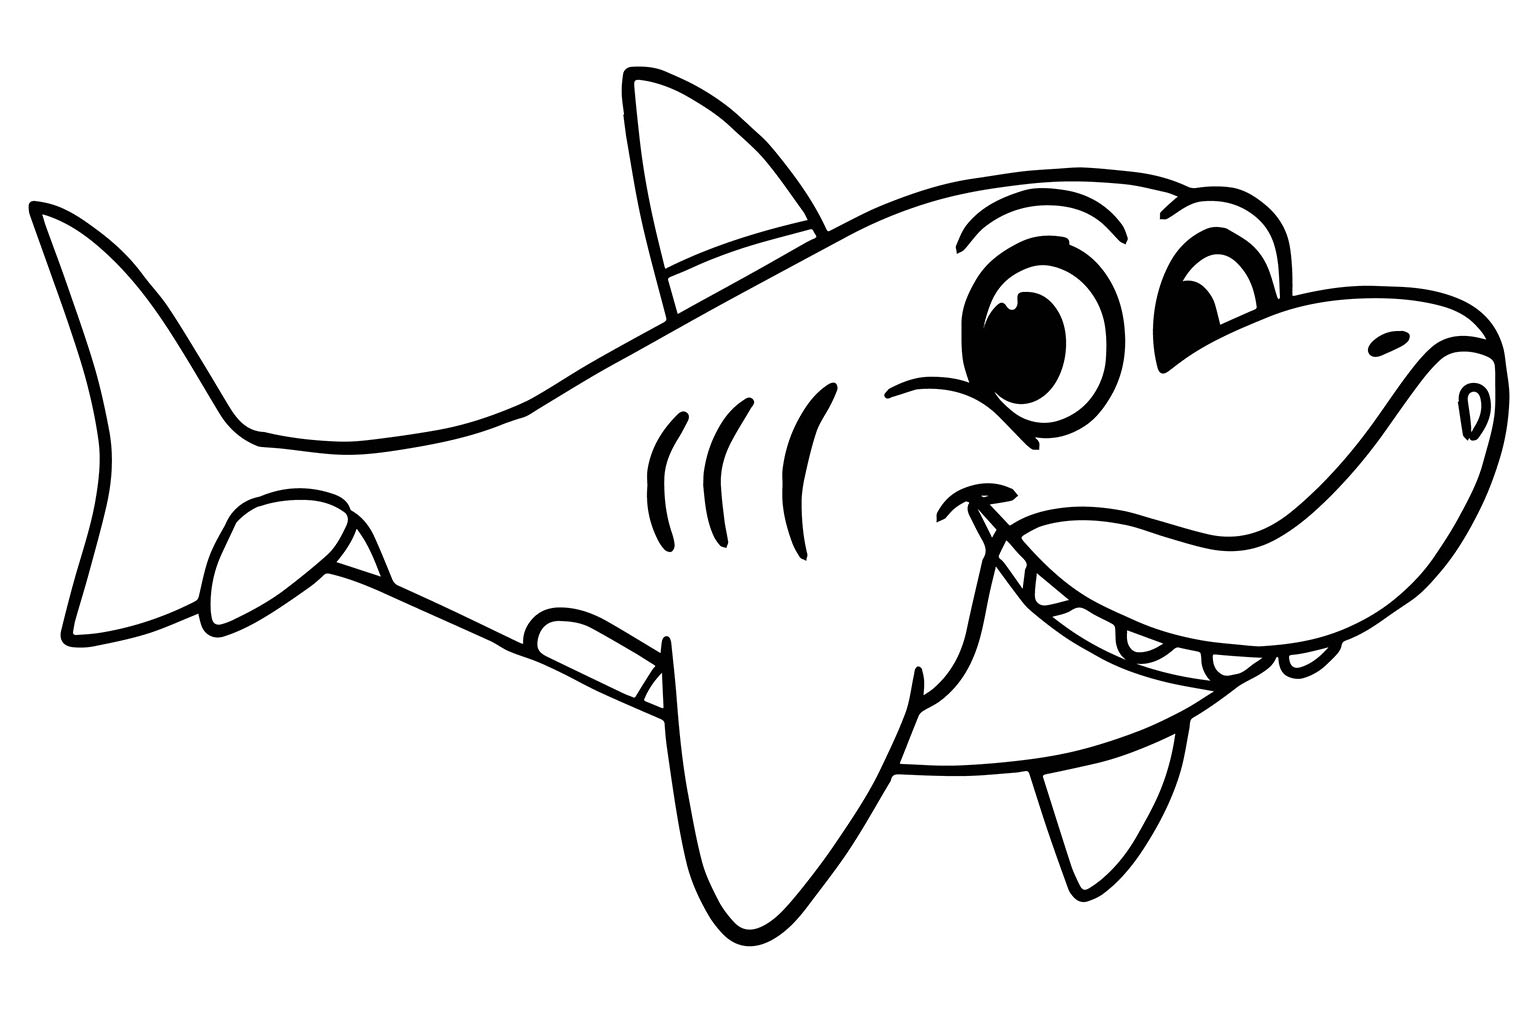 requin-souriant-sharks-kids-coloring-pages